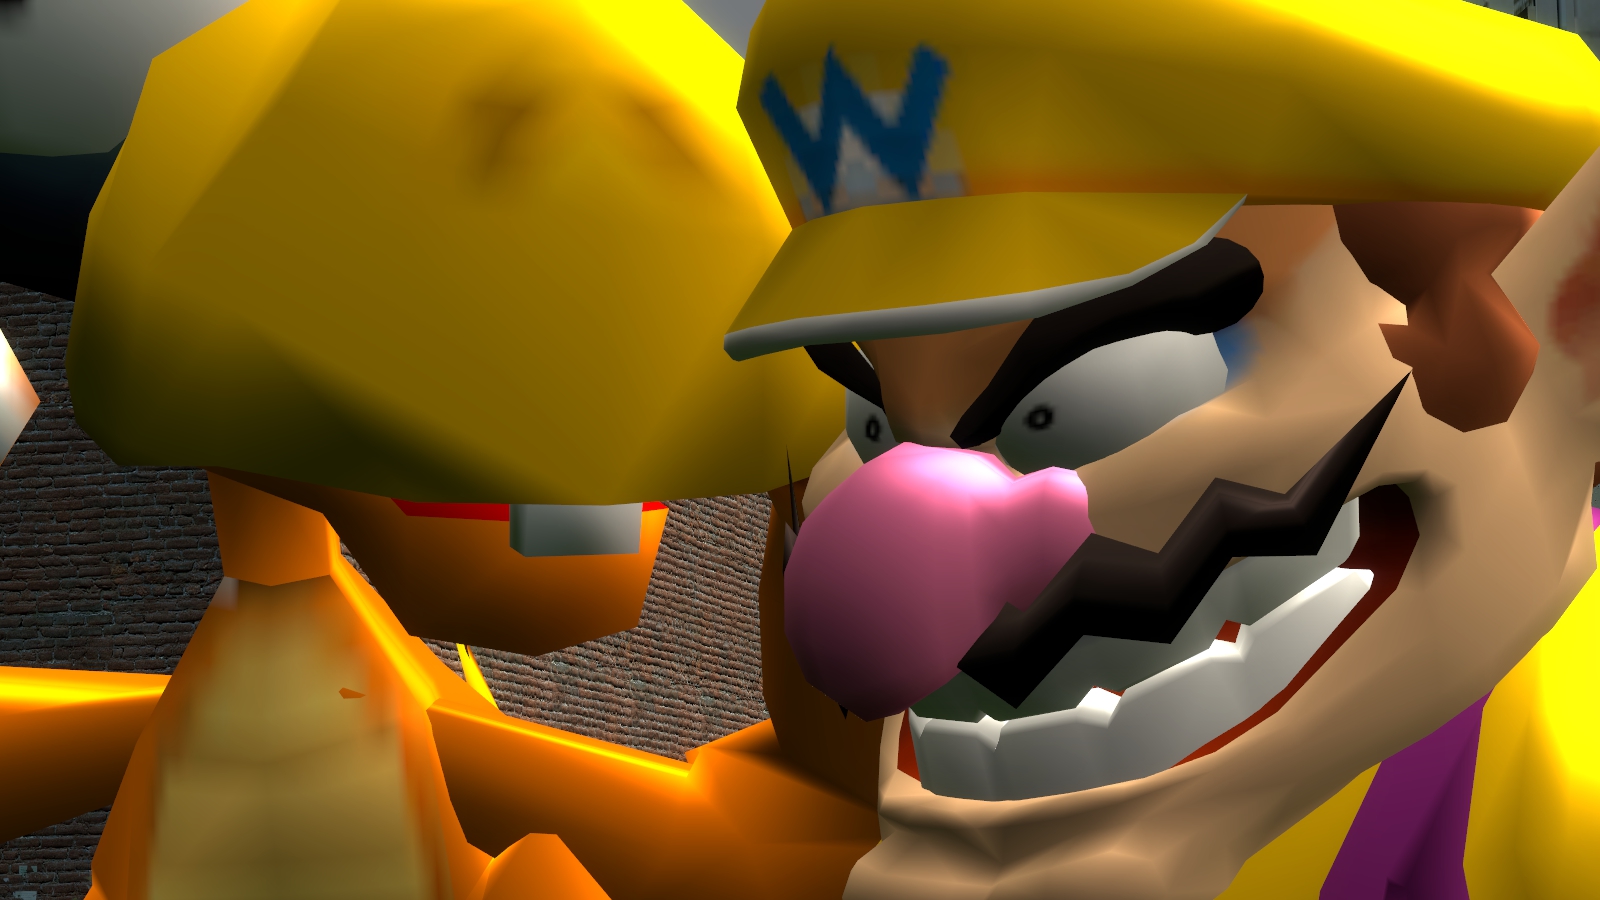 Insane Facts About Wario - A Powerful Wizard